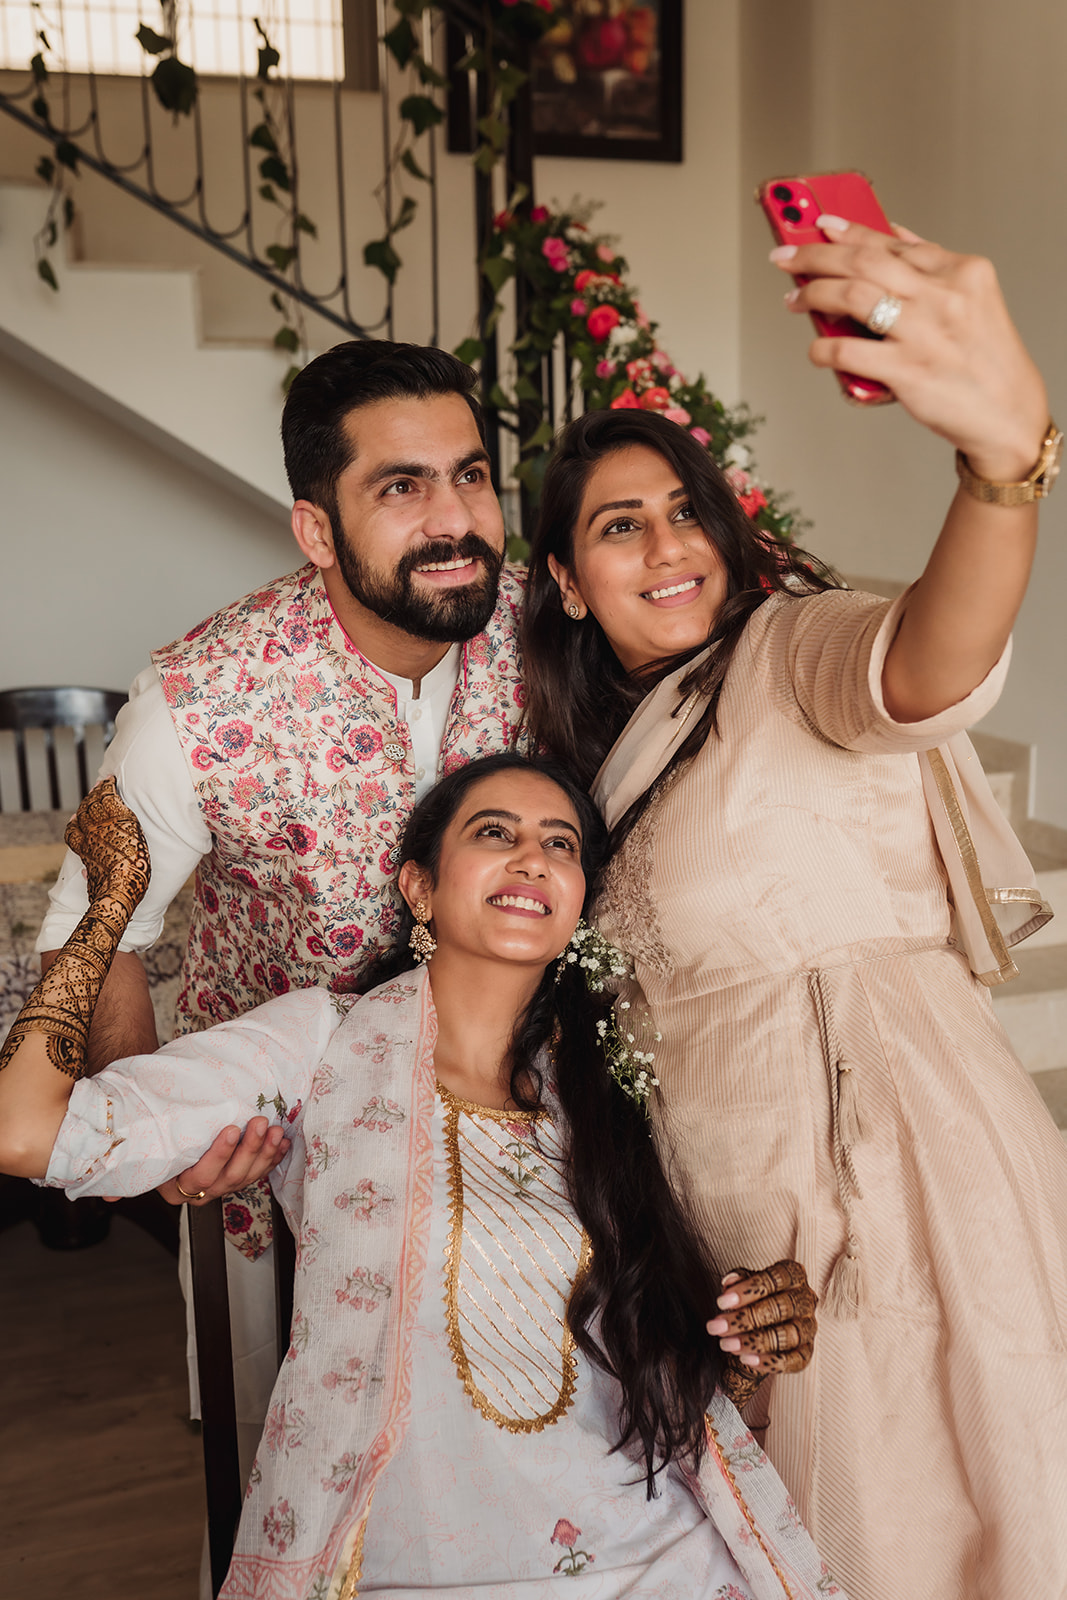 Family selfie joy: The bride captures a joyful moment with her loved ones in this heartwarming image